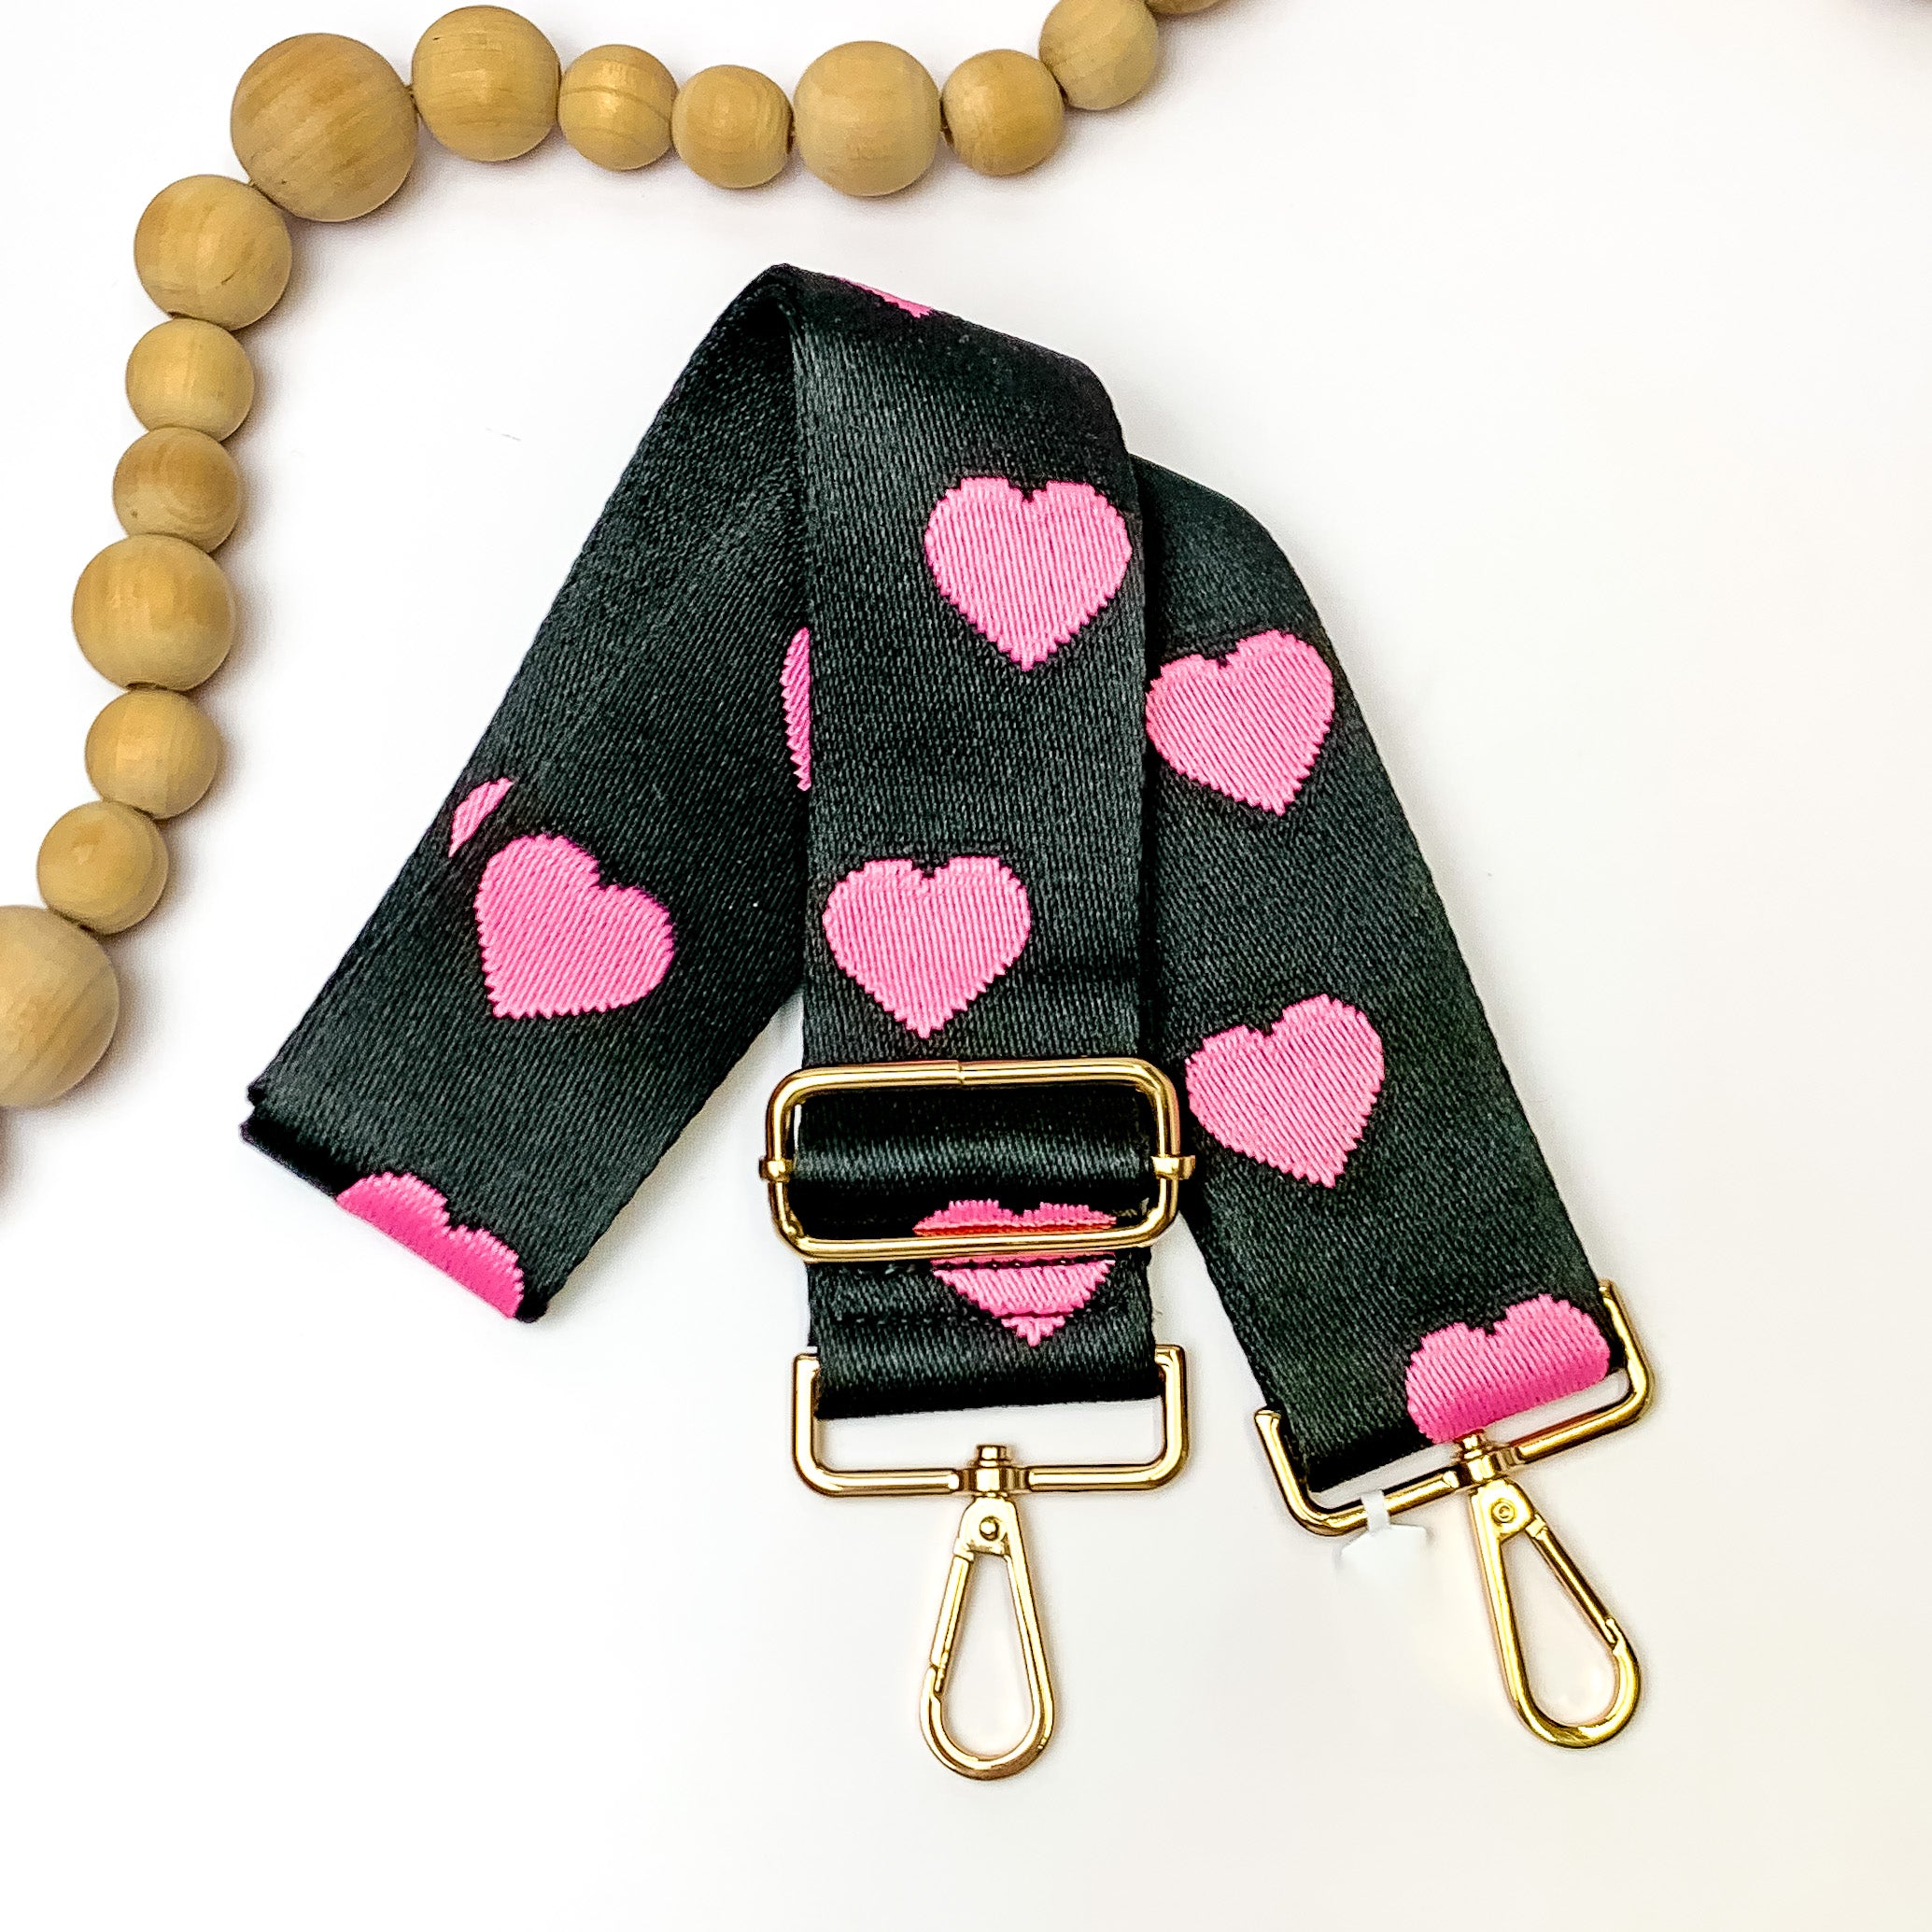 Black purse strap with a pink heart design. This purse strap includes gold hardware. This purse strap os pictured on a white background with tan beads in the top left corner. 